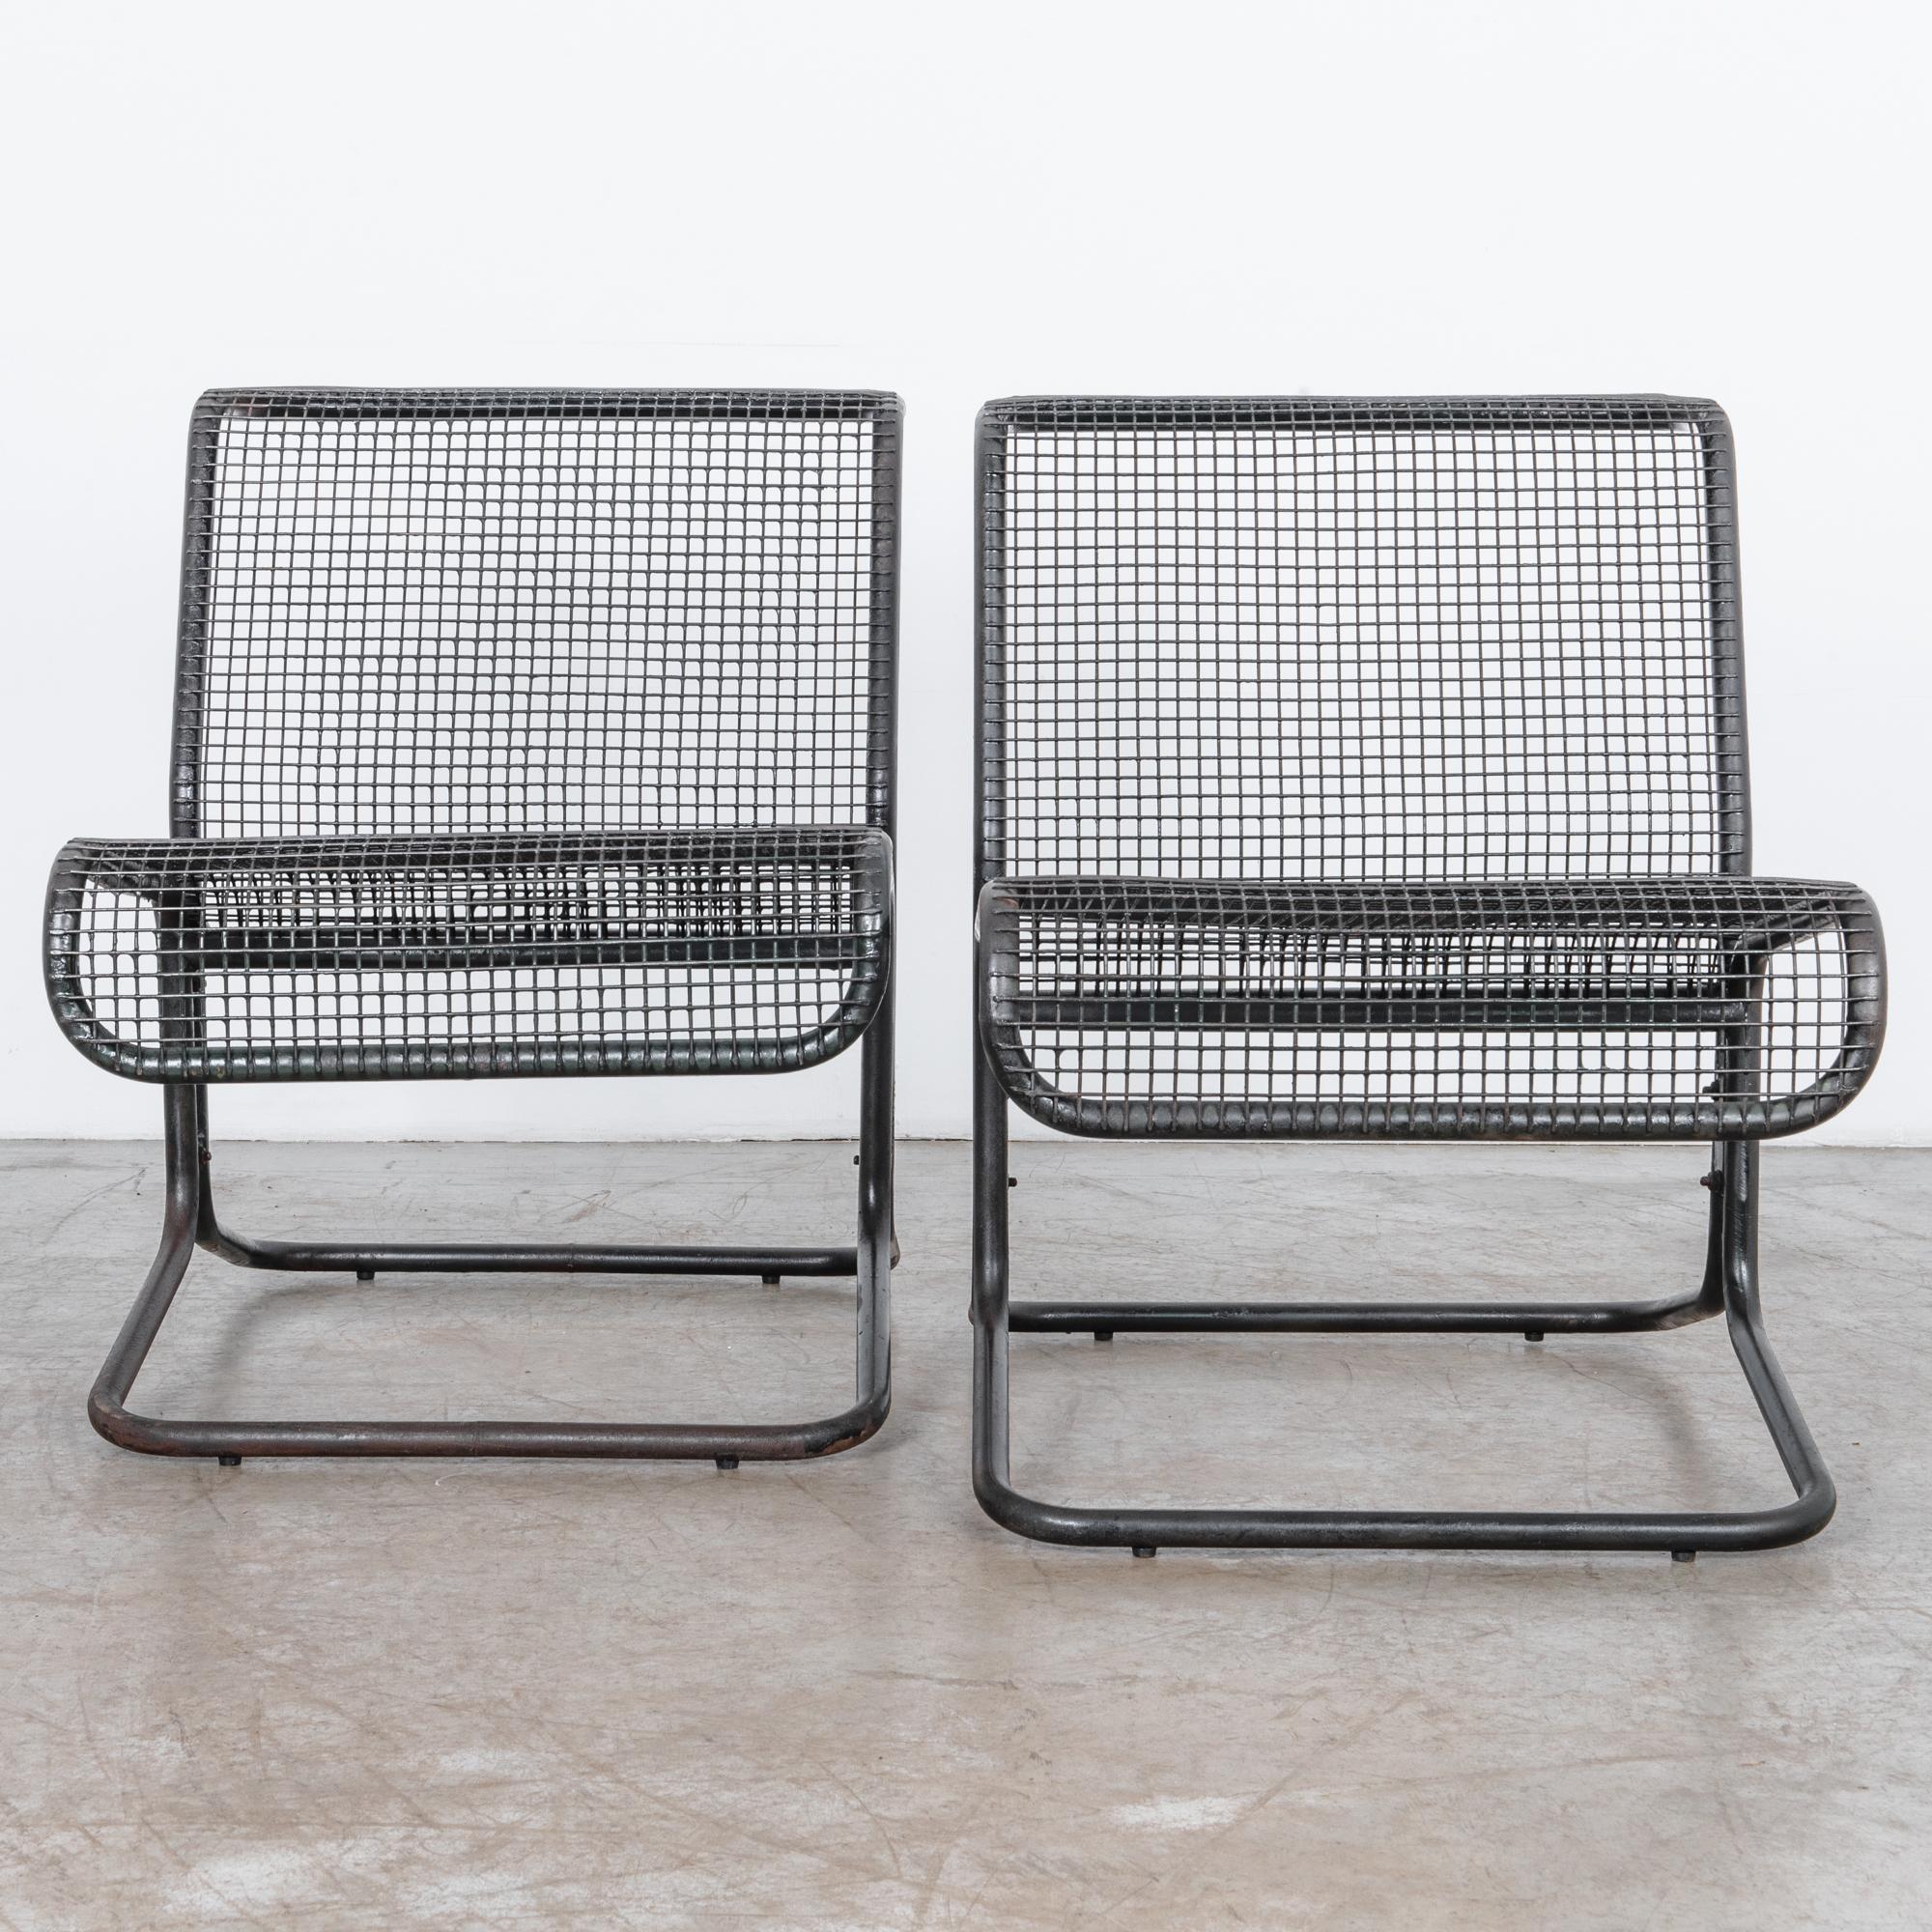 Black enameled tubular steel frame with metal mesh back and seat. From circa 1970 Czech Republic these chairs stylishly blend the elements of design and practicality with a rugged and attractive metal frame.